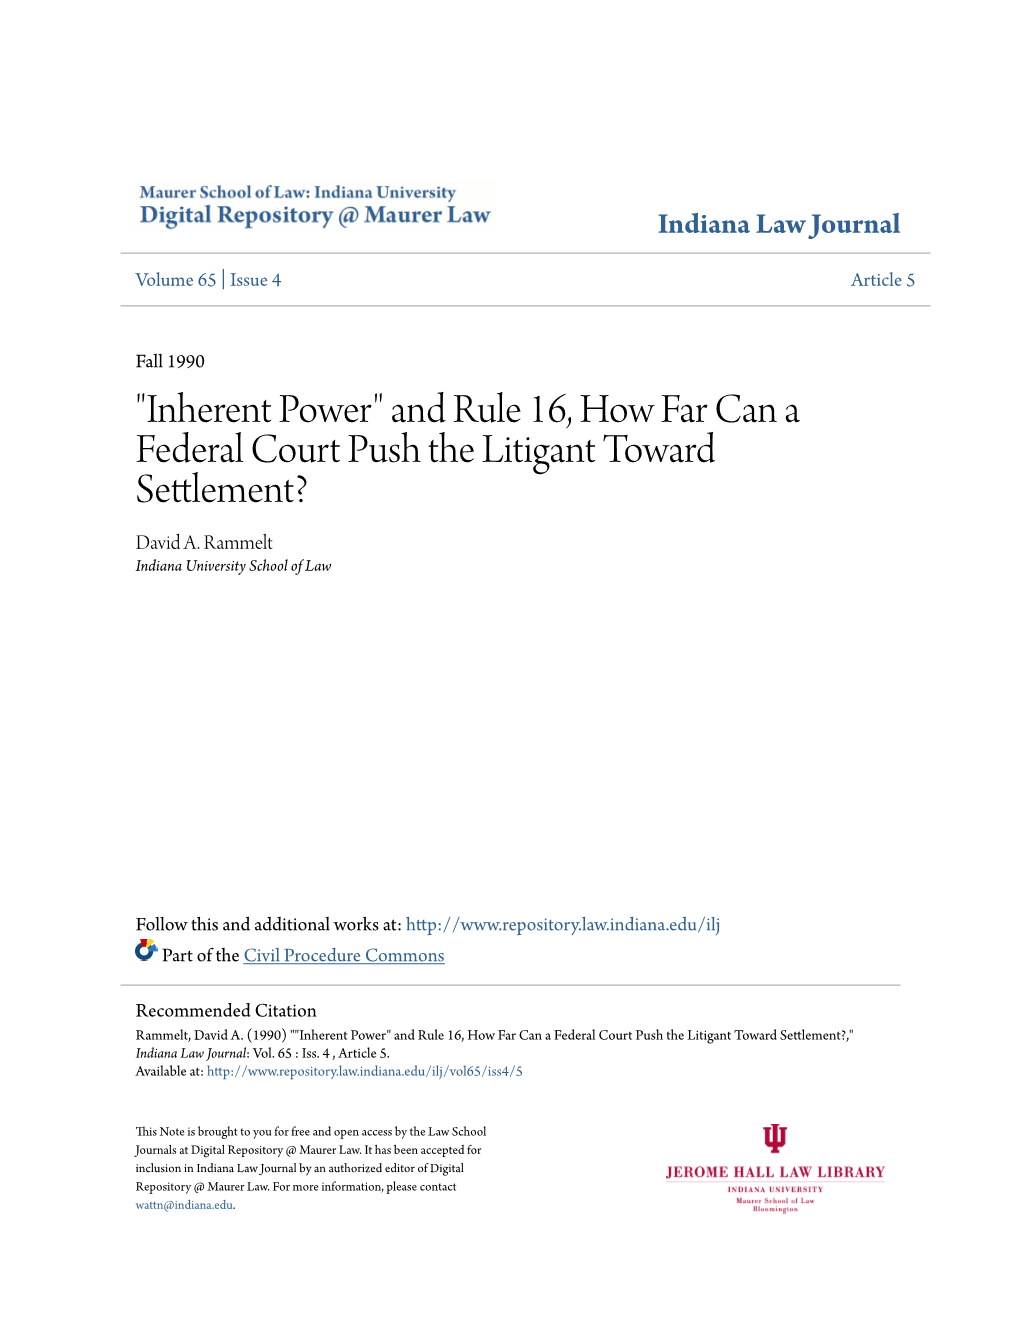 Inherent Power" and Rule 16, How Far Can a Federal Court Push the Litigant Toward Settlement? David A